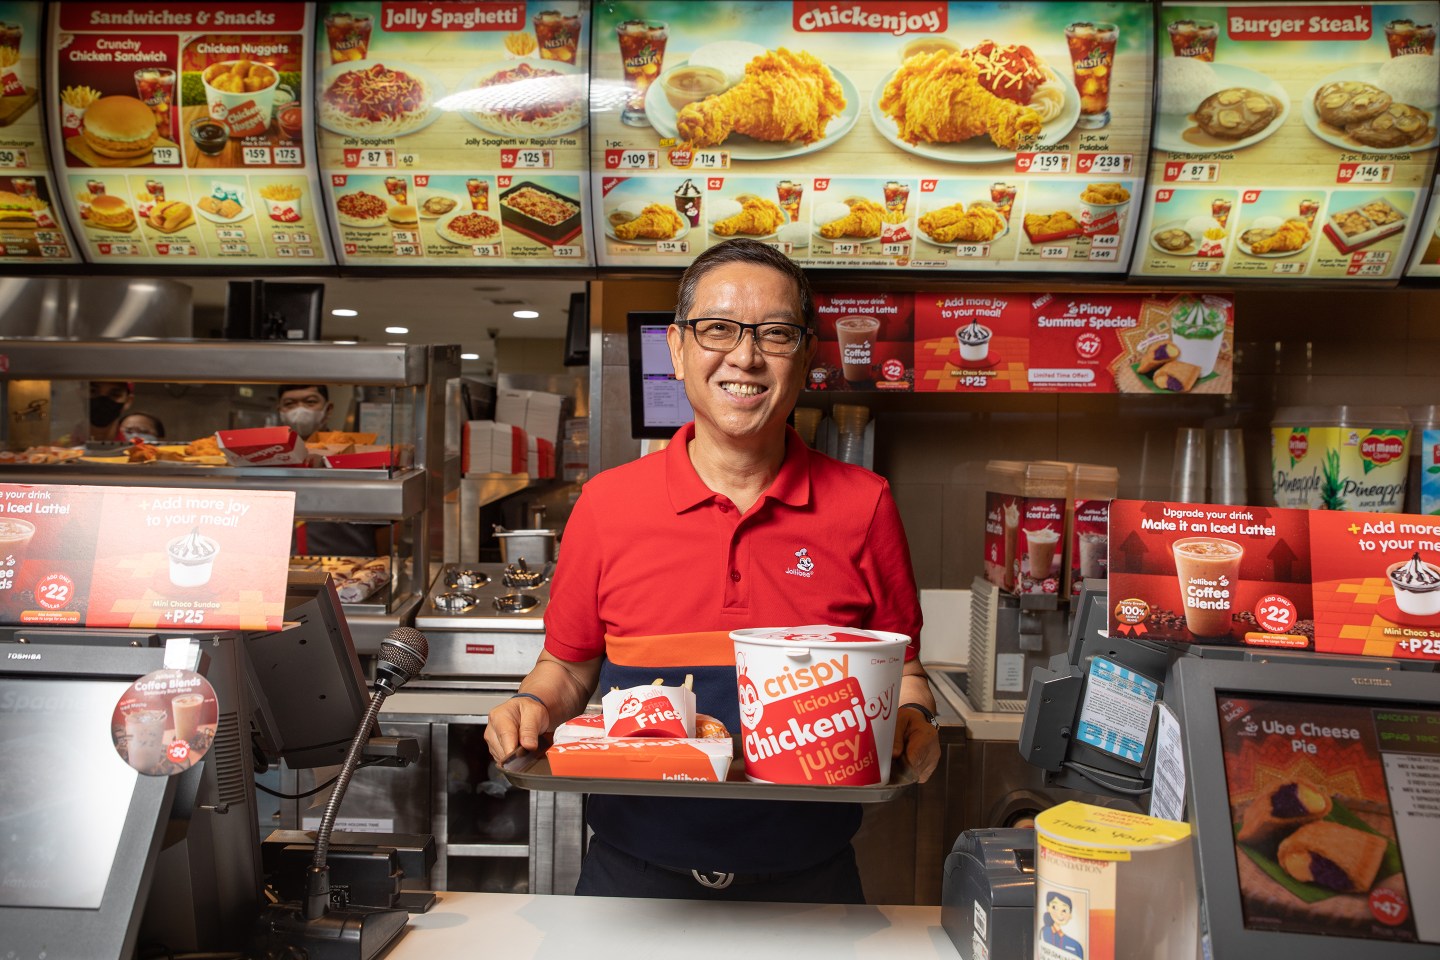 Jollibee CEO Ernesto Tanmantiong behind the counter holding a tray of Chickenjoy and fries.